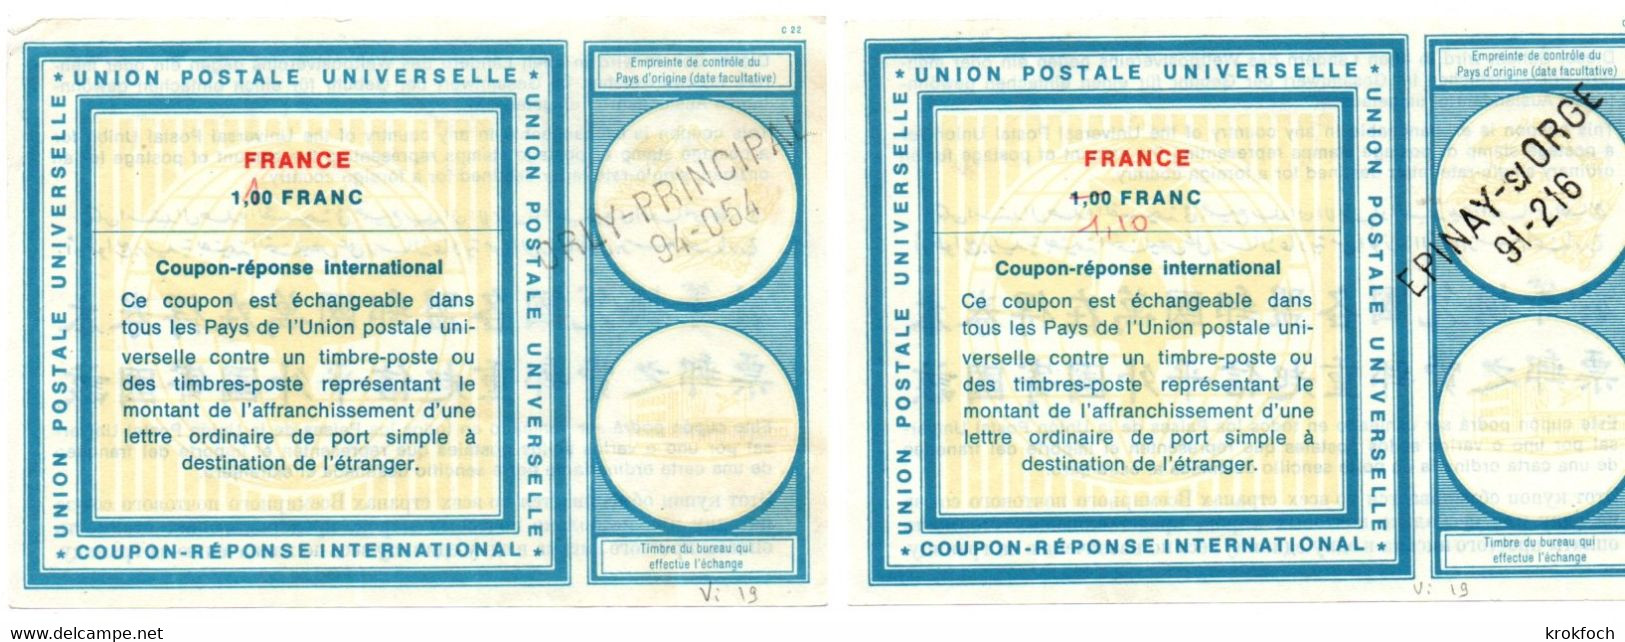 France - 2 Coupon-réponse Type Vienne 19  - Griffe Orly Principal & Epinay-s/-Orge - IAS CRI IRC - Antwortscheine